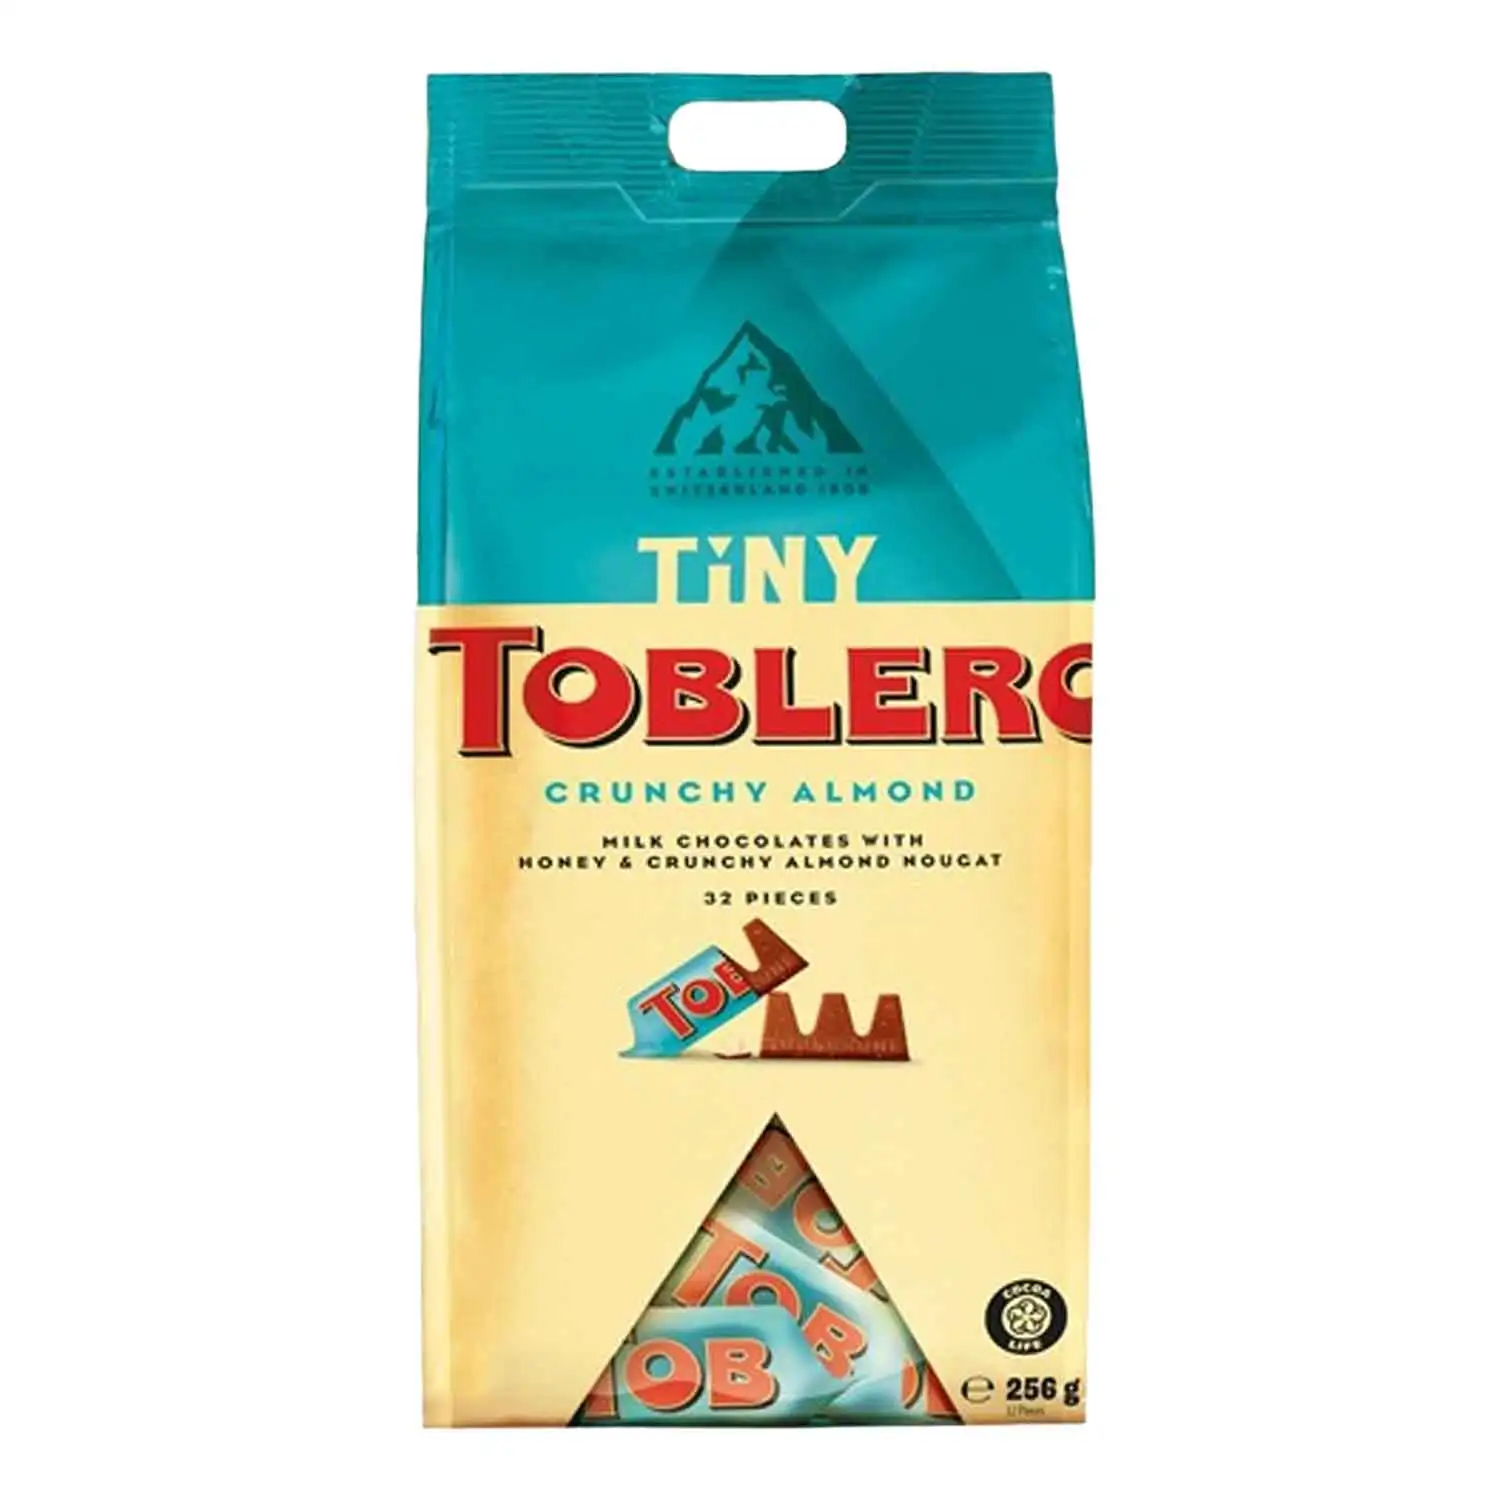 Toblerone tiny crunchy almond 256g - Buy at Real Tobacco